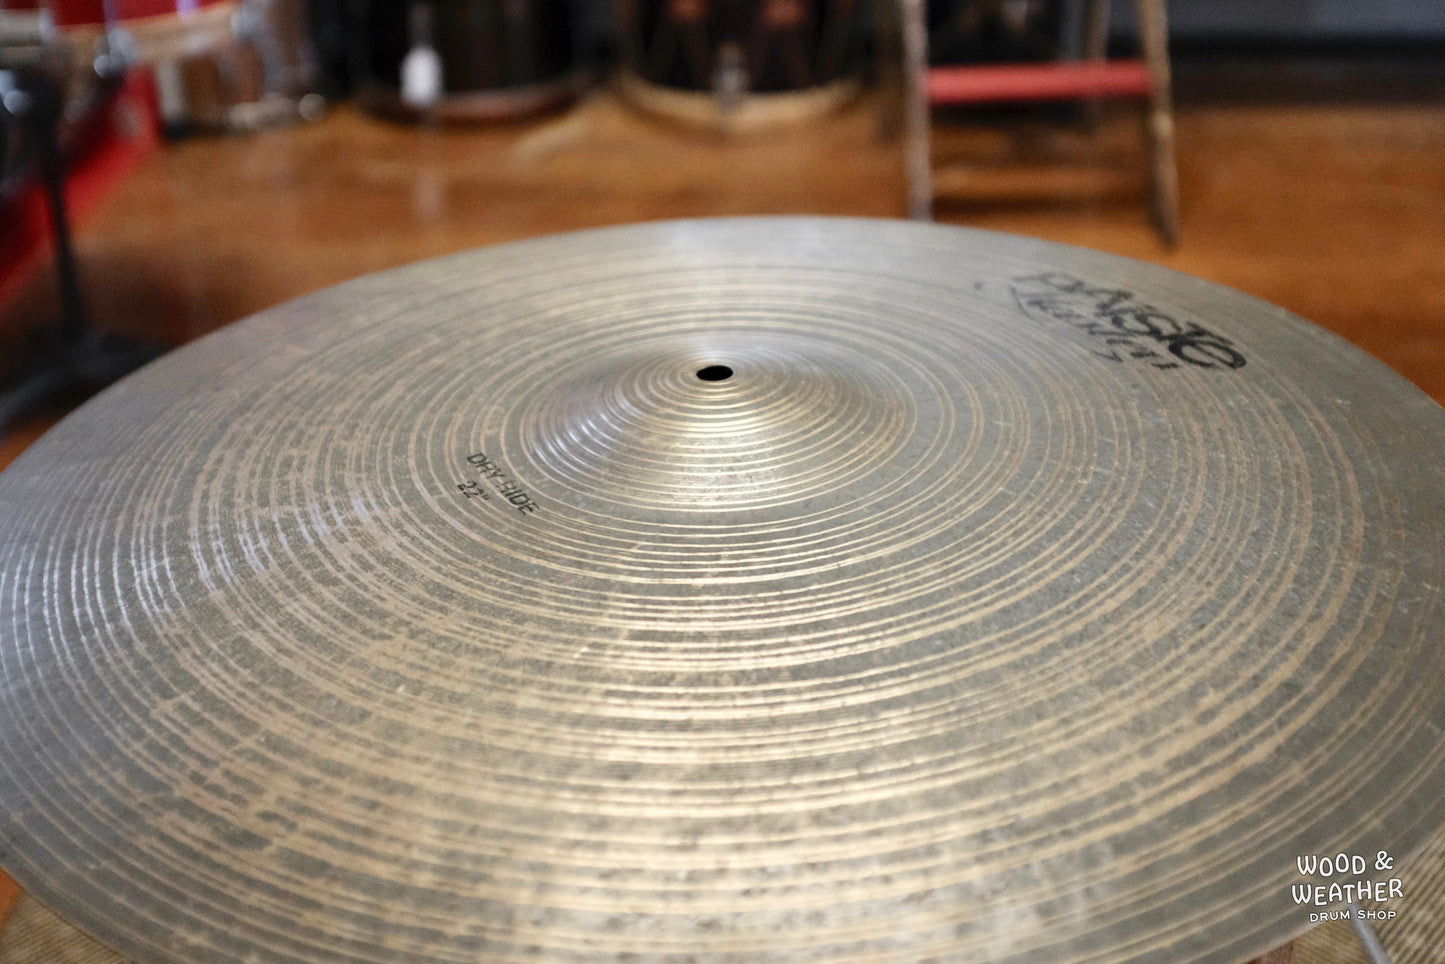 Used Paiste 22" Masters Dry Ride Cymbal 2641g